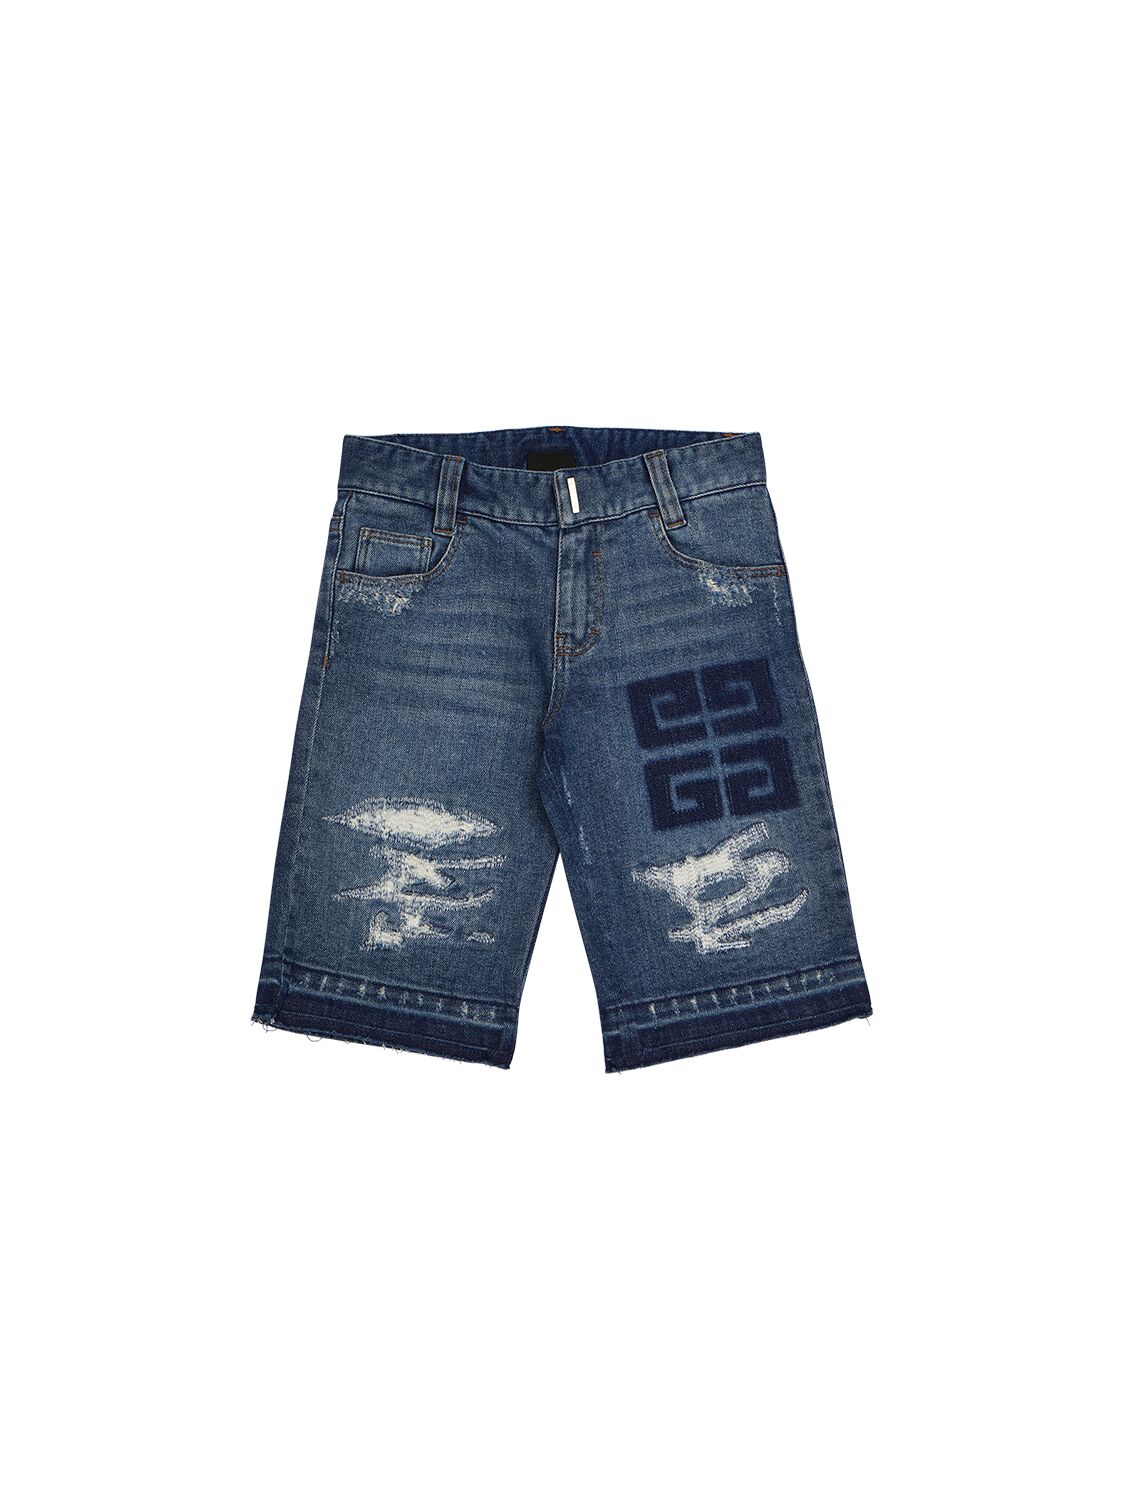 Givenchy Distressed Cotton Denim Shorts In Blue